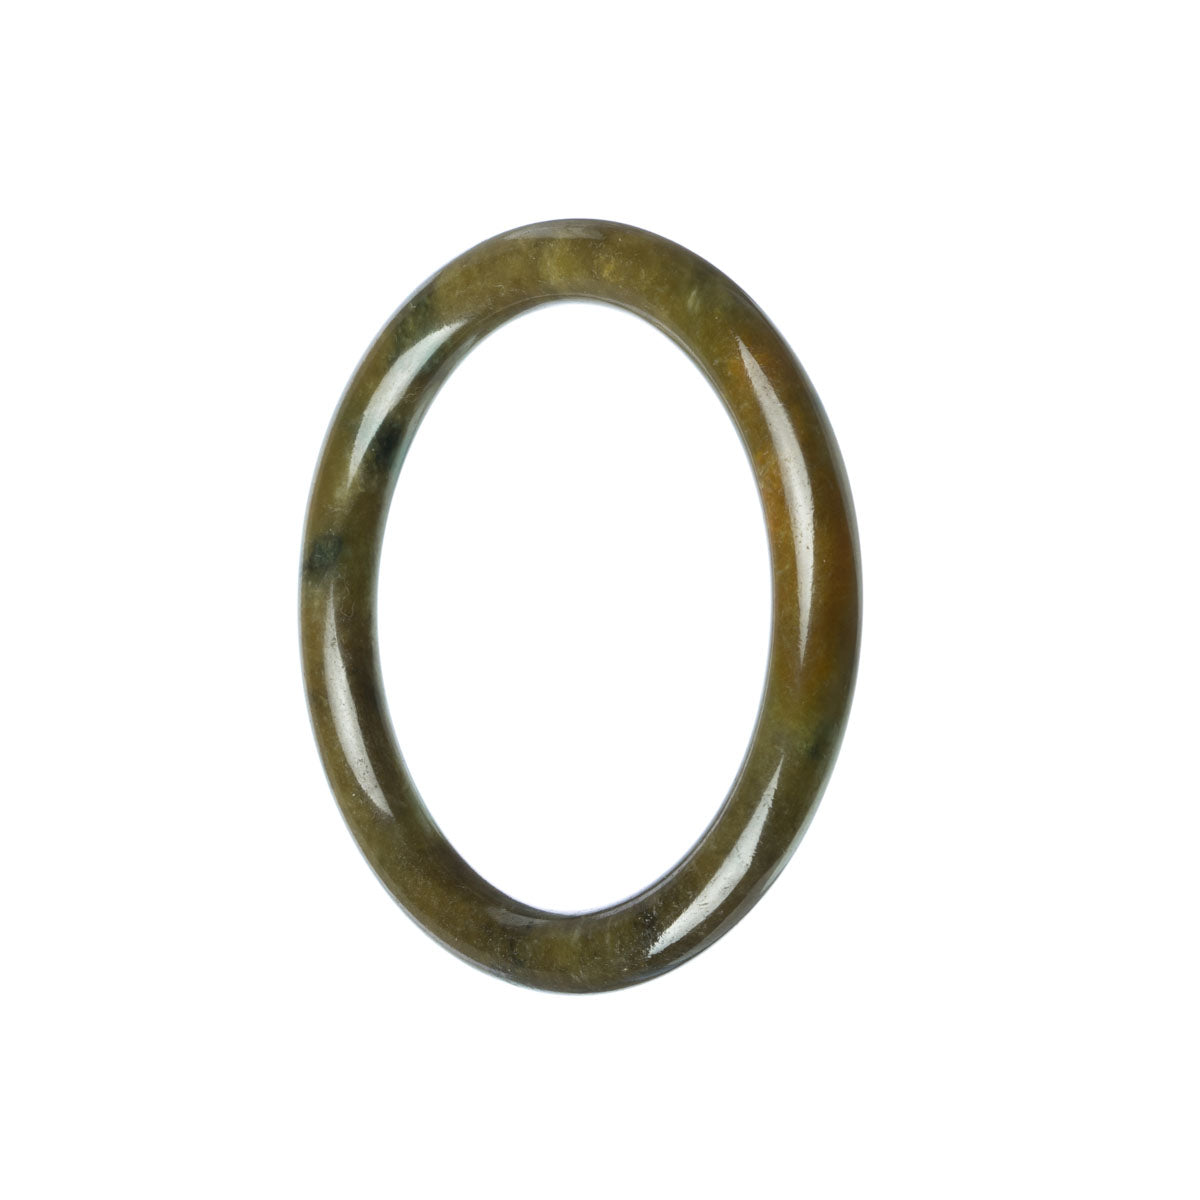 A small round green jadeite bangle bracelet with a genuine untreated finish.